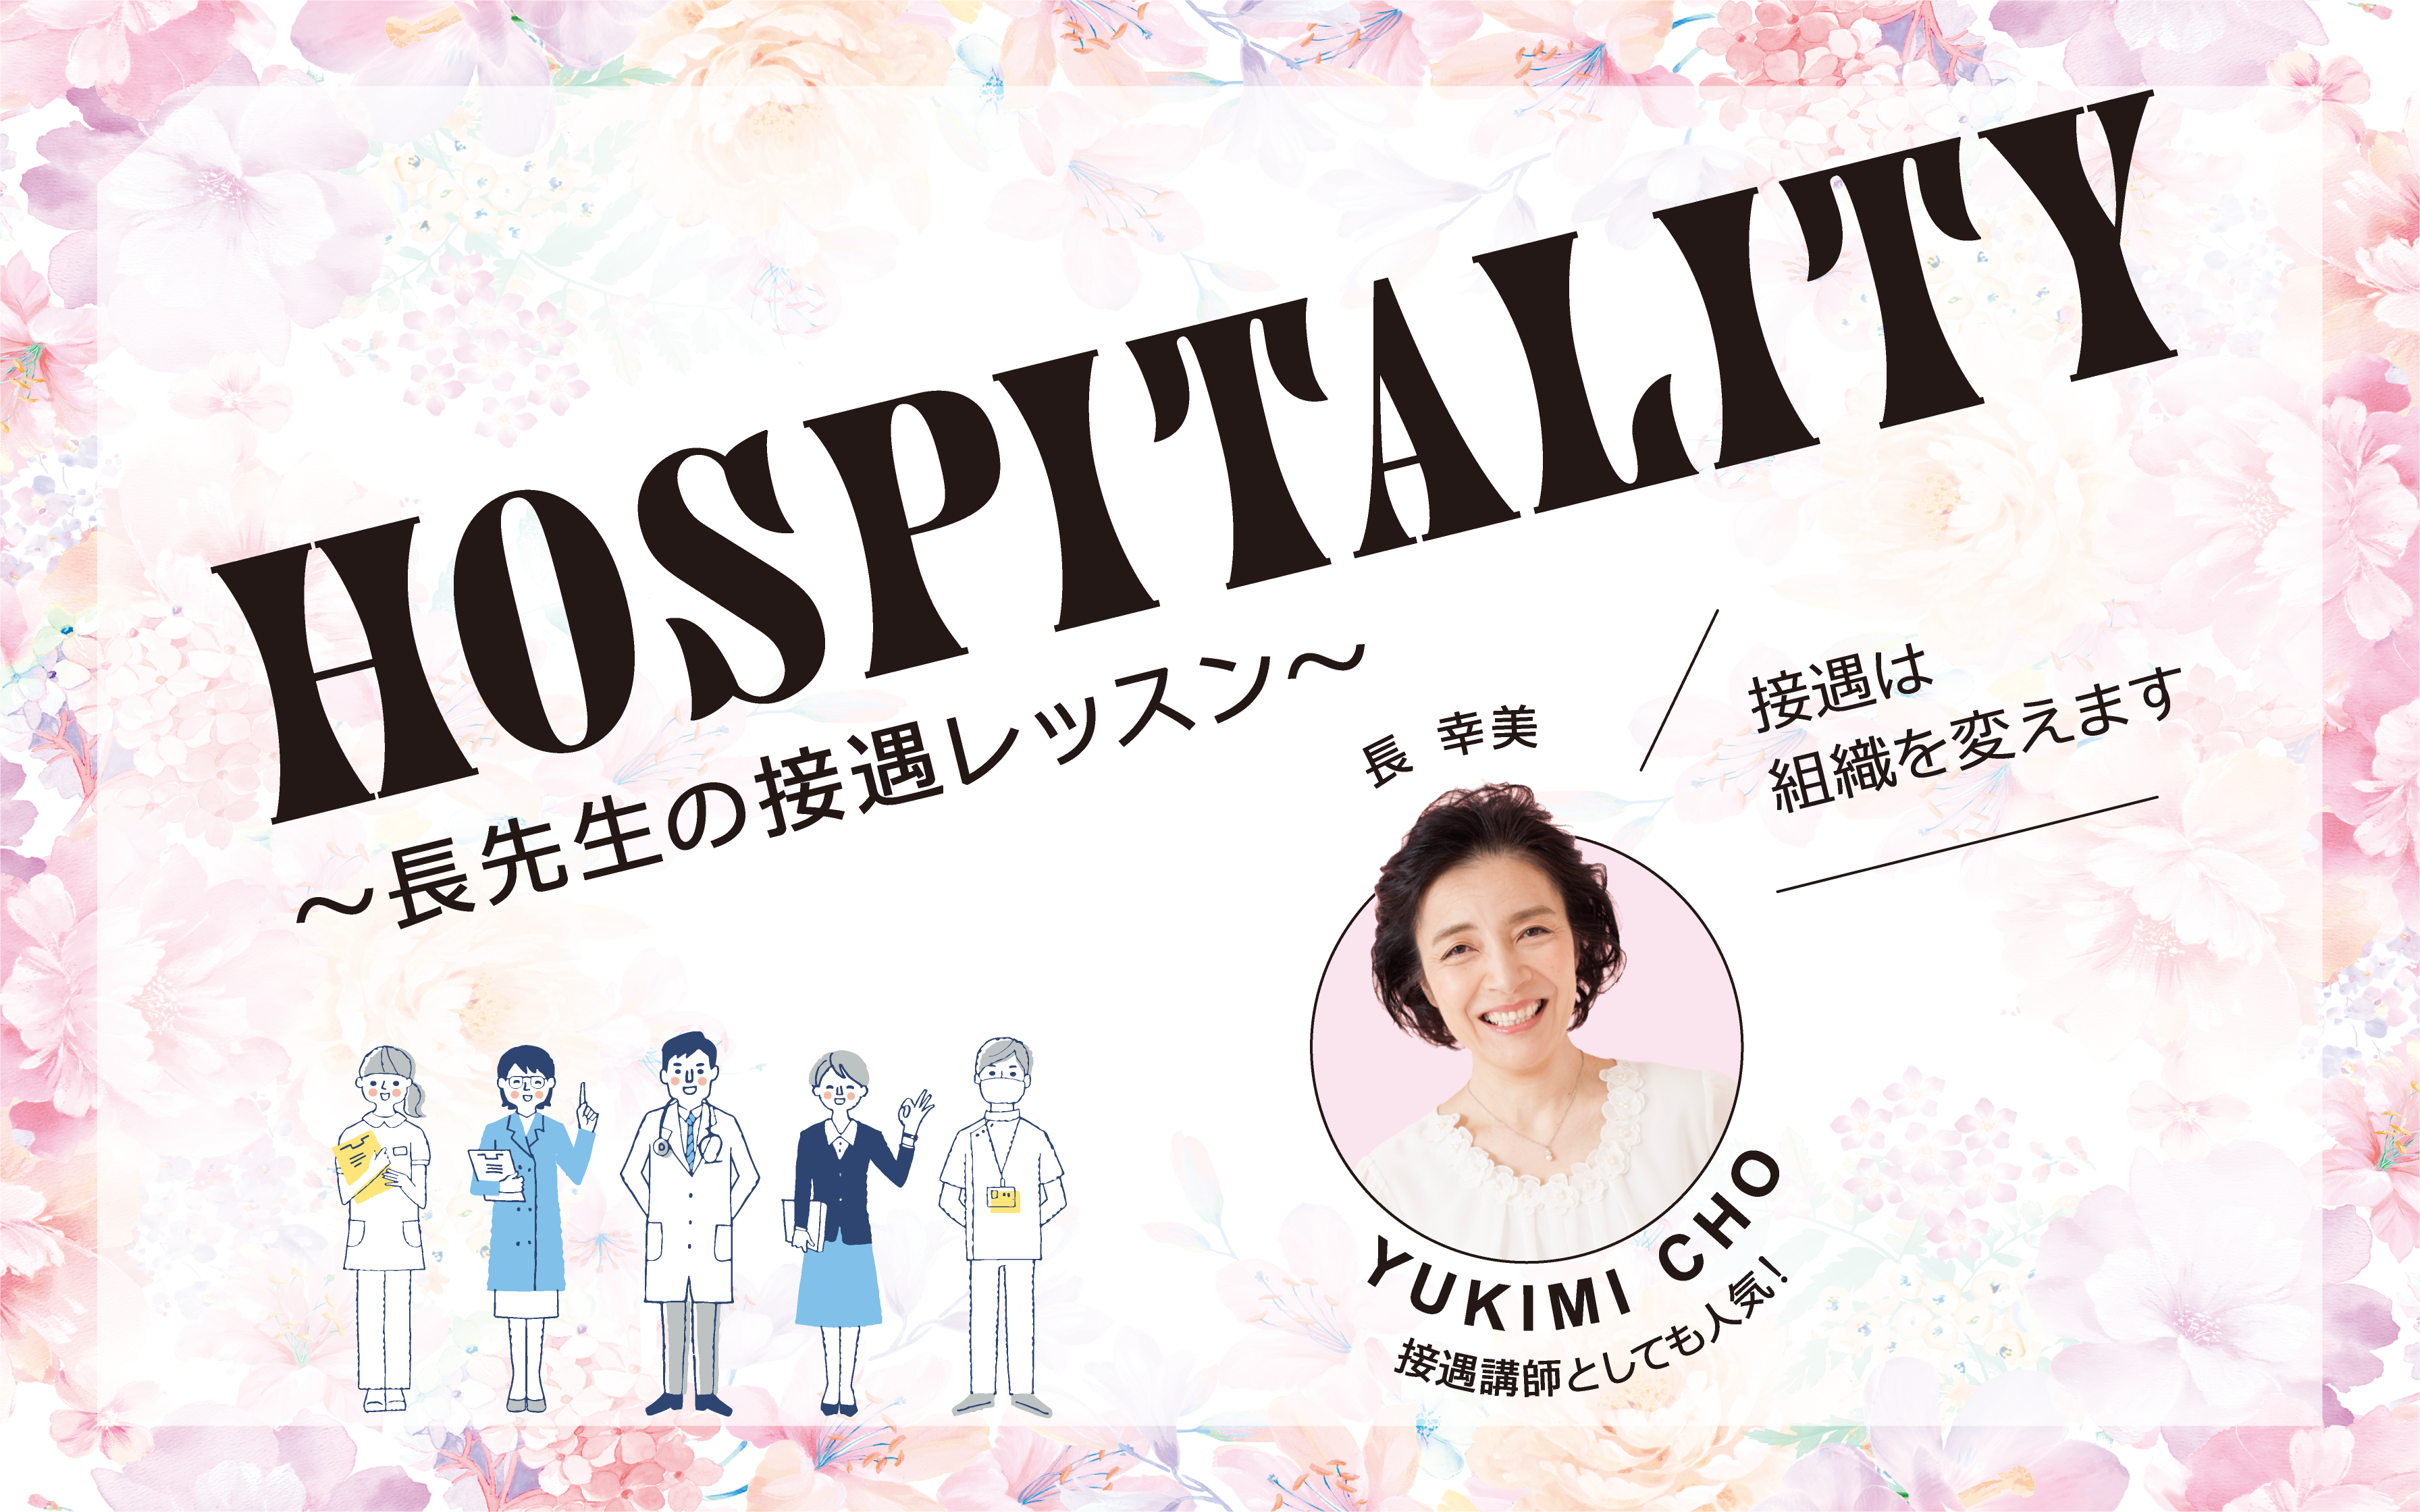 You are currently viewing HOSPITALITY 〜長先生の接遇レッスン〜 VOL.36寄り添うということ